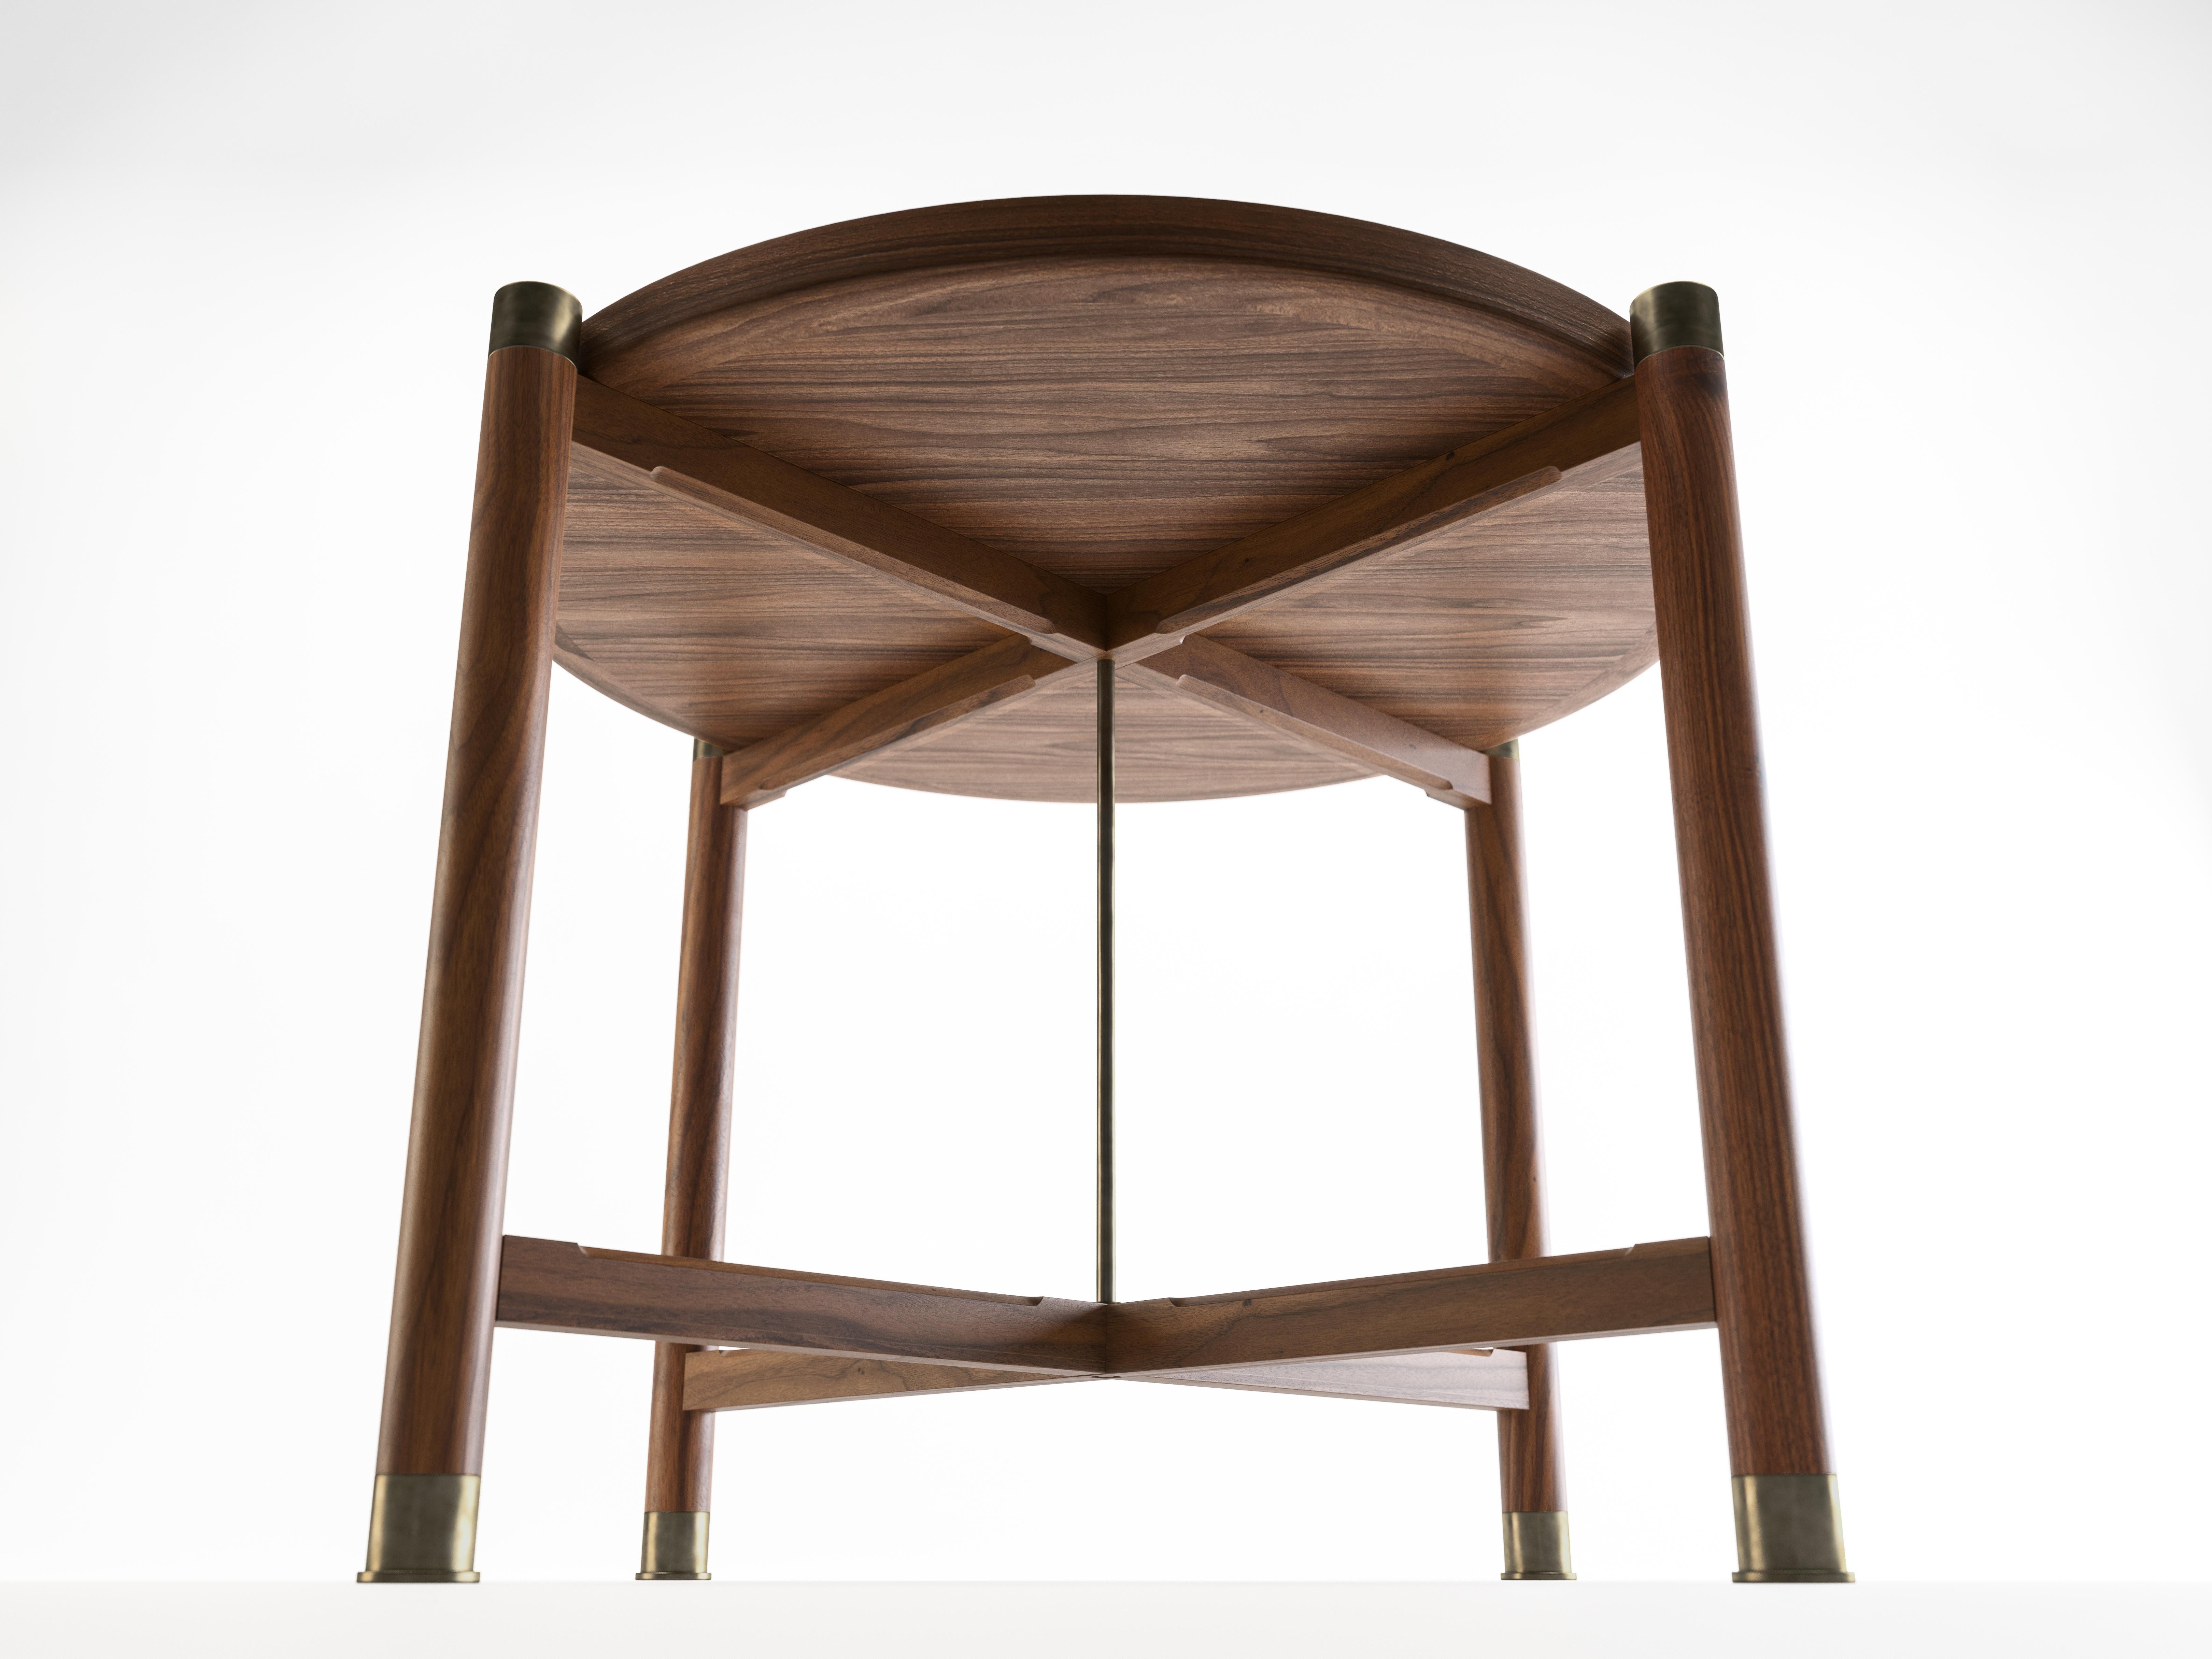 American Custom Otto Round Side Table in Lt Walnut with Antique Brass Fittings and Stem